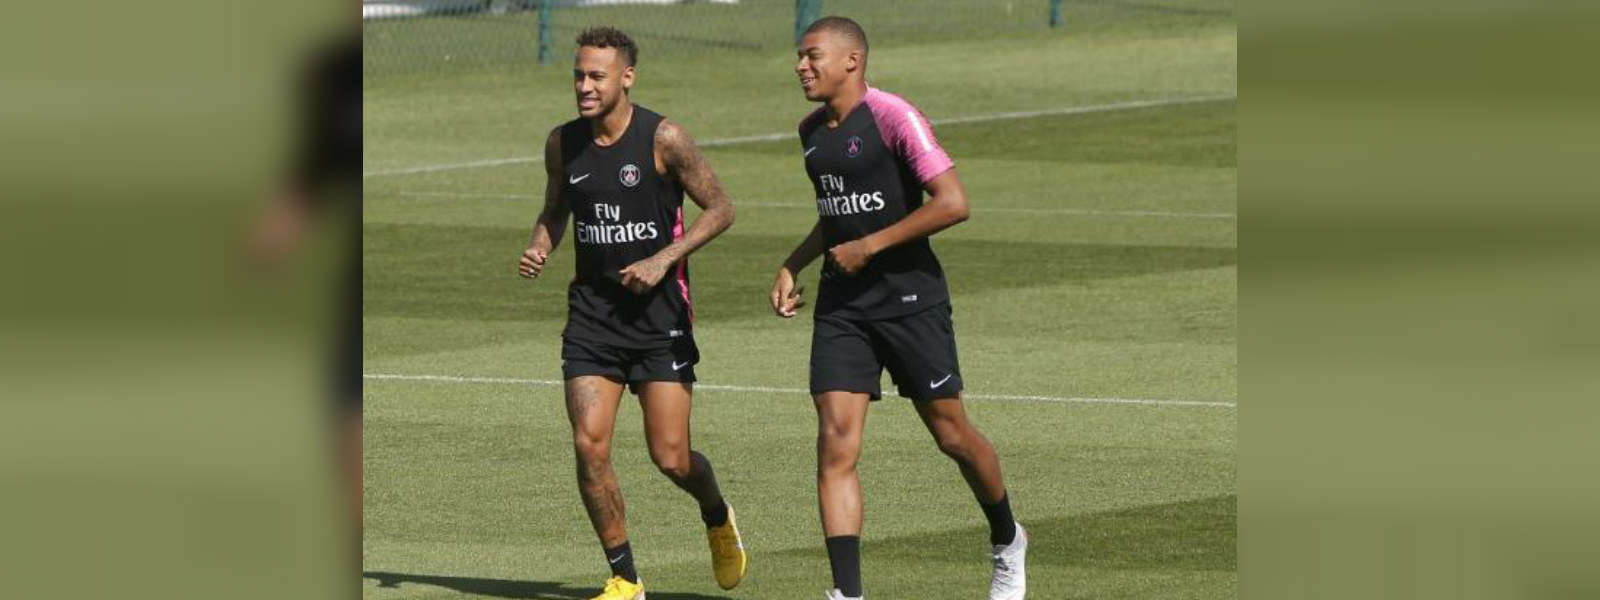 Mbappe, Neymar fit to face Liverpool - PSG Coach